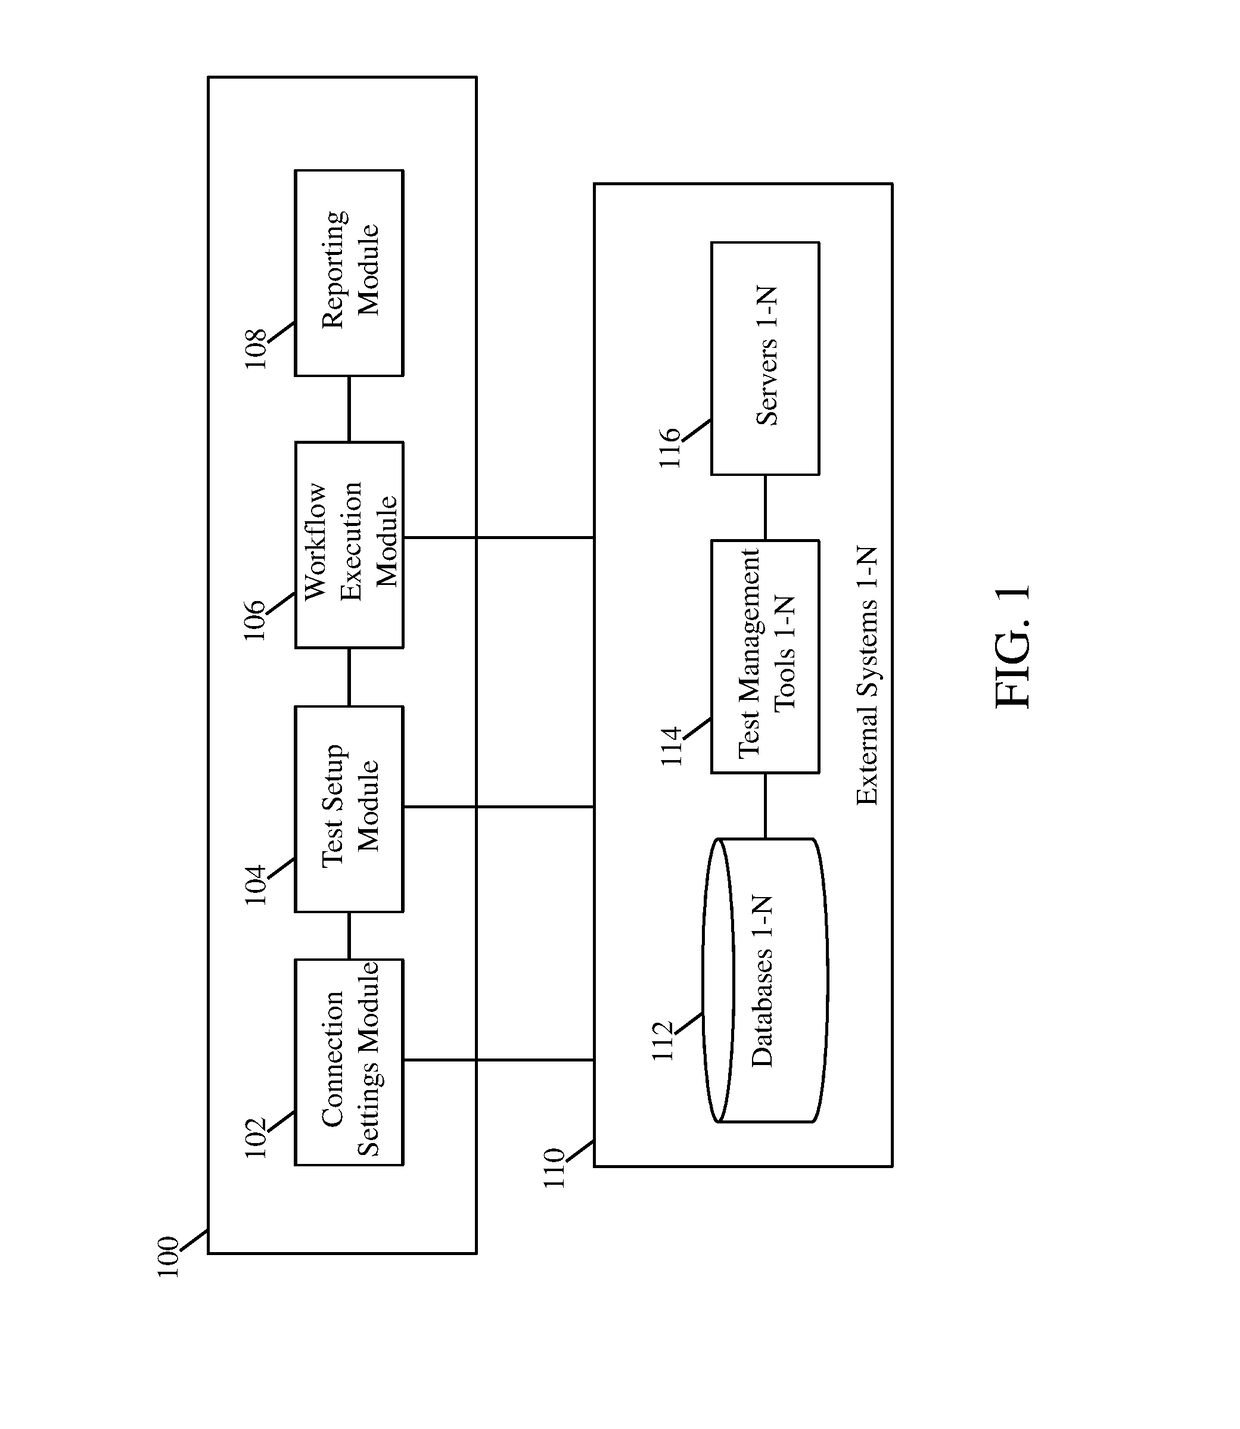 System and method for automating testing without scripting